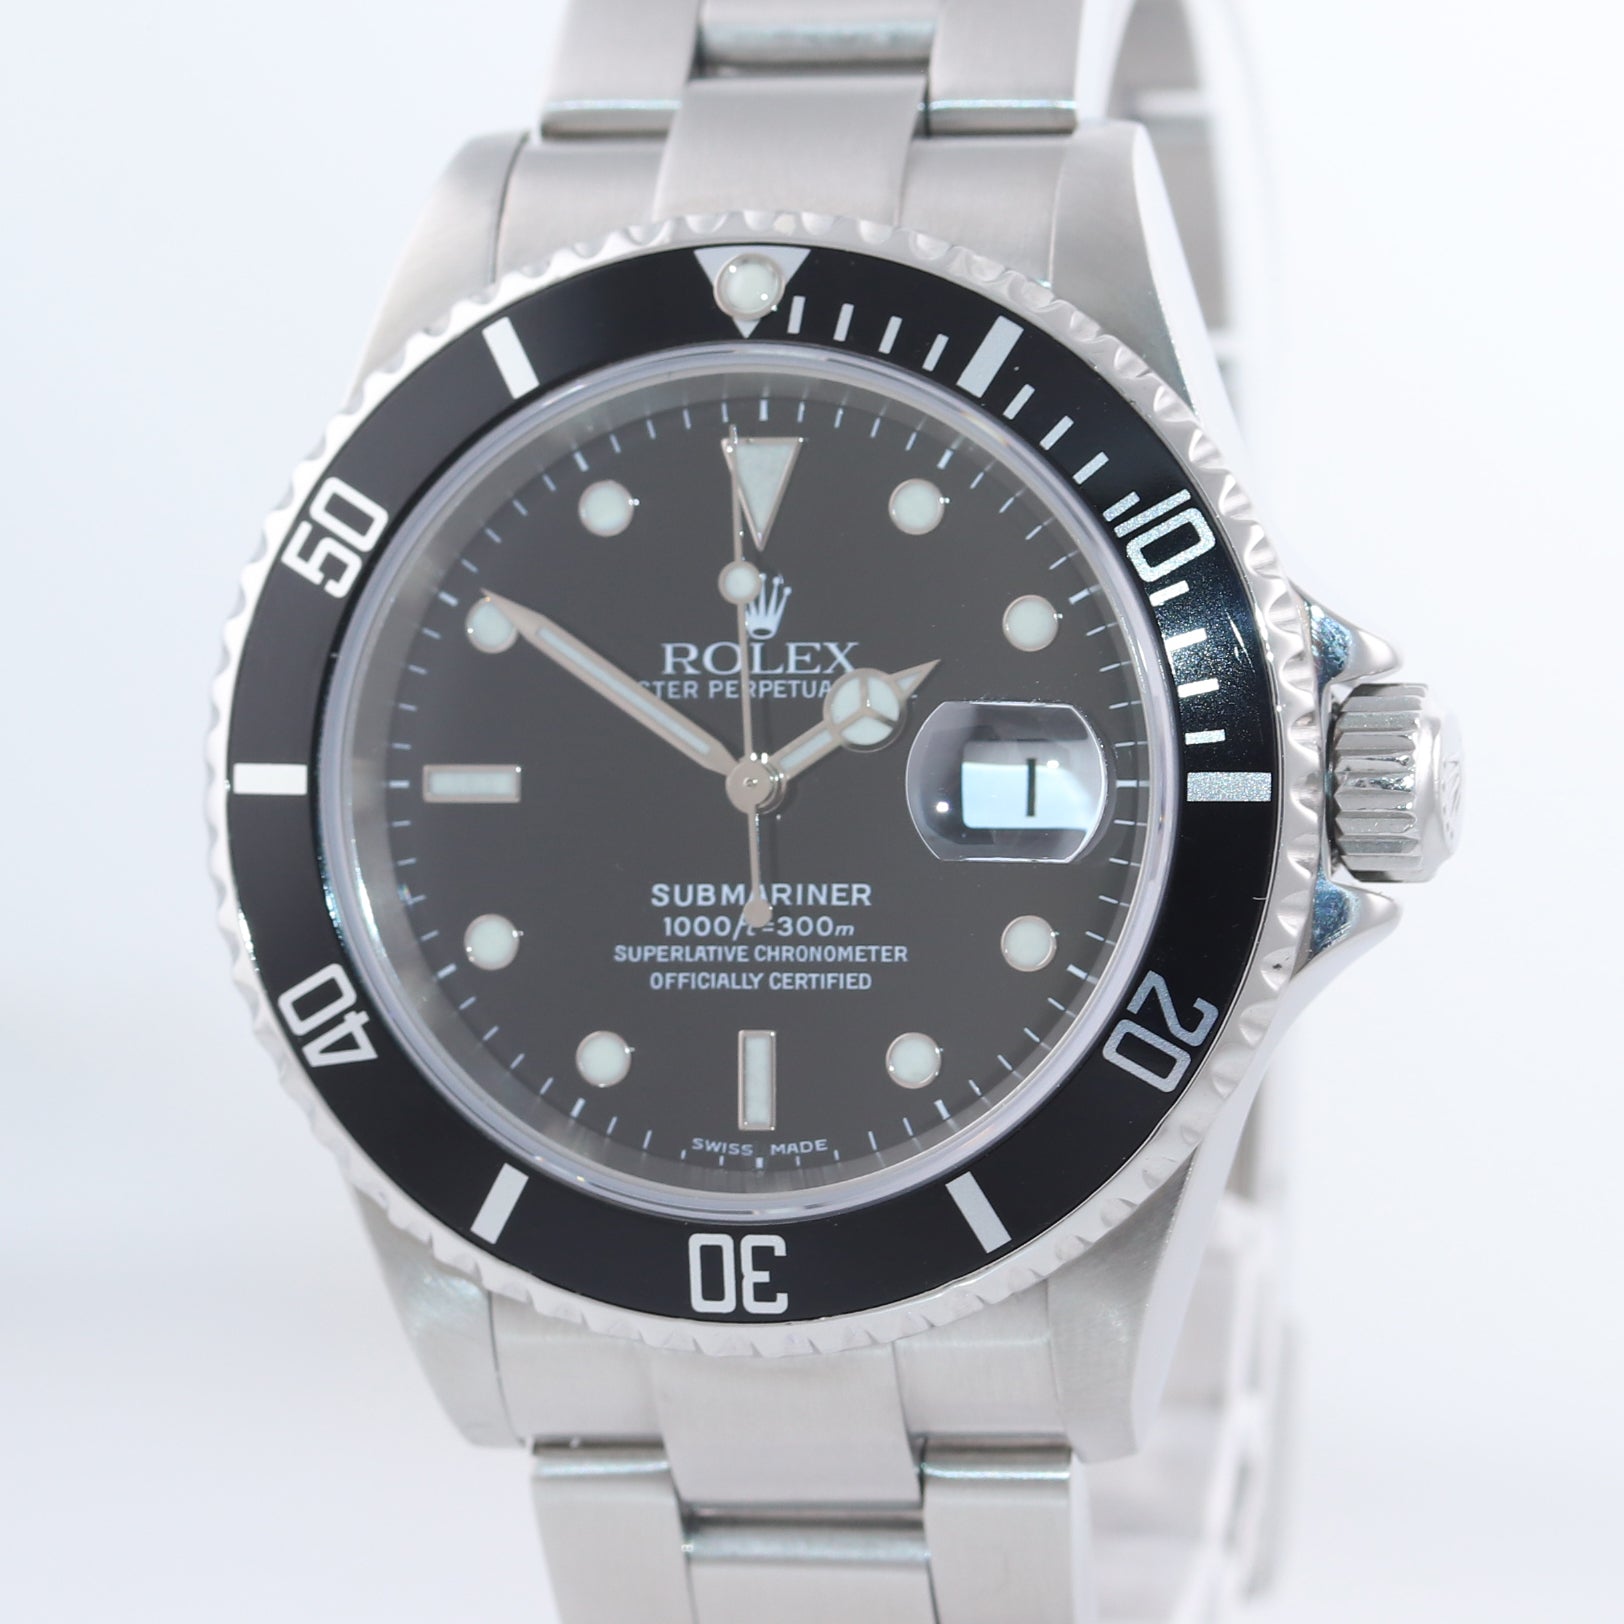 2005 PAPERS MINT Rolex Submariner Date 16610 Steel Black NO HOLES Watch Box